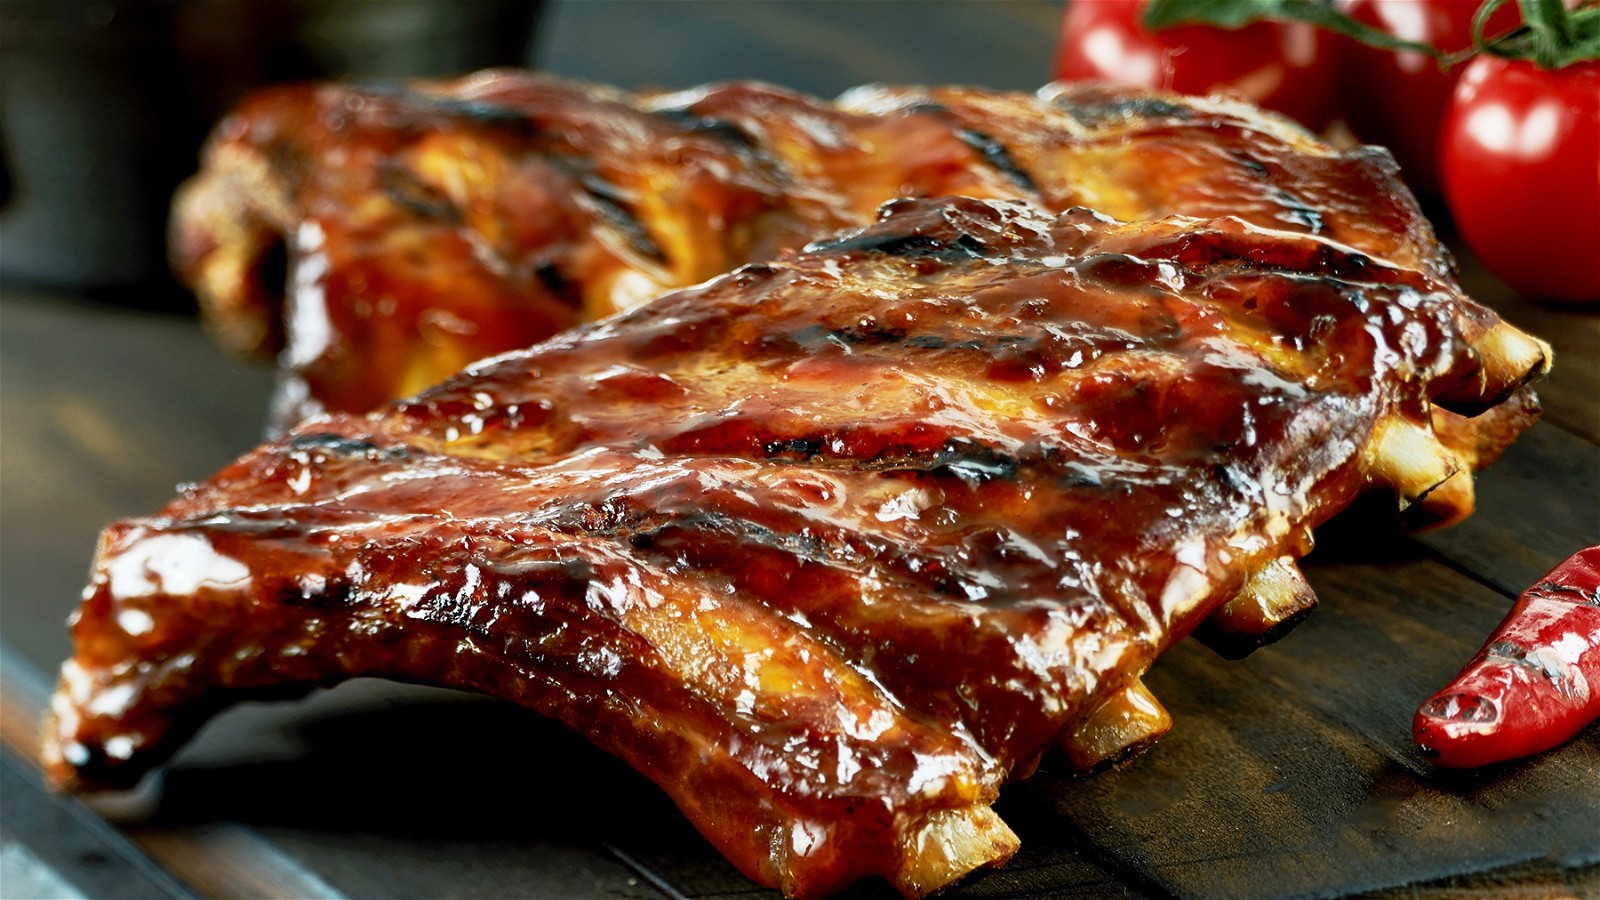 Image of BBQ Ribs with Smashed Potatoes